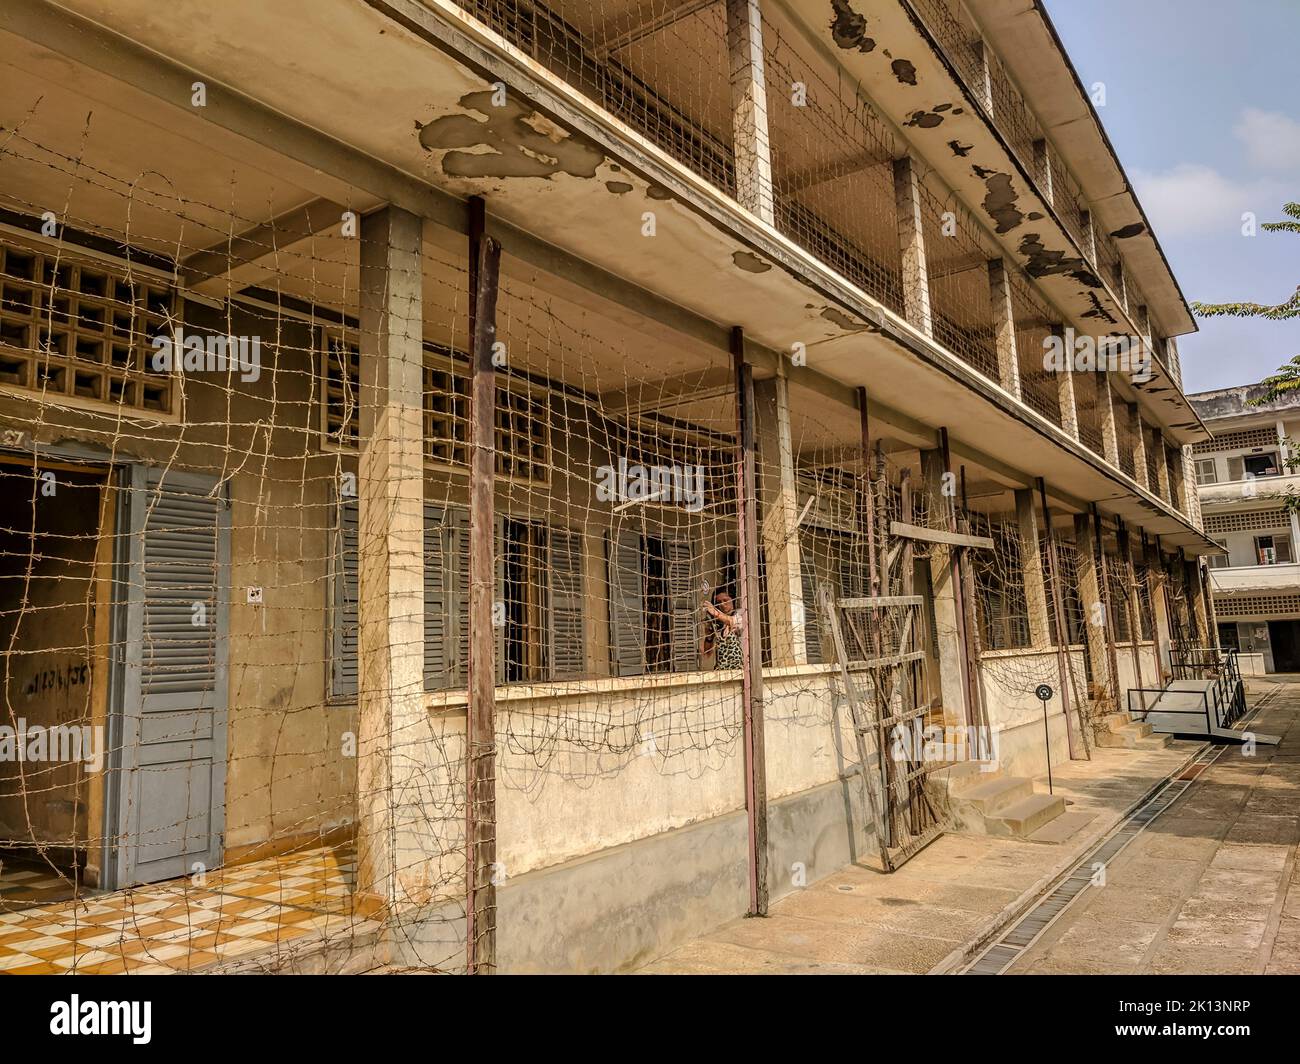 Tuol Sleng Genocide Museum, Cambodia Stock Photo